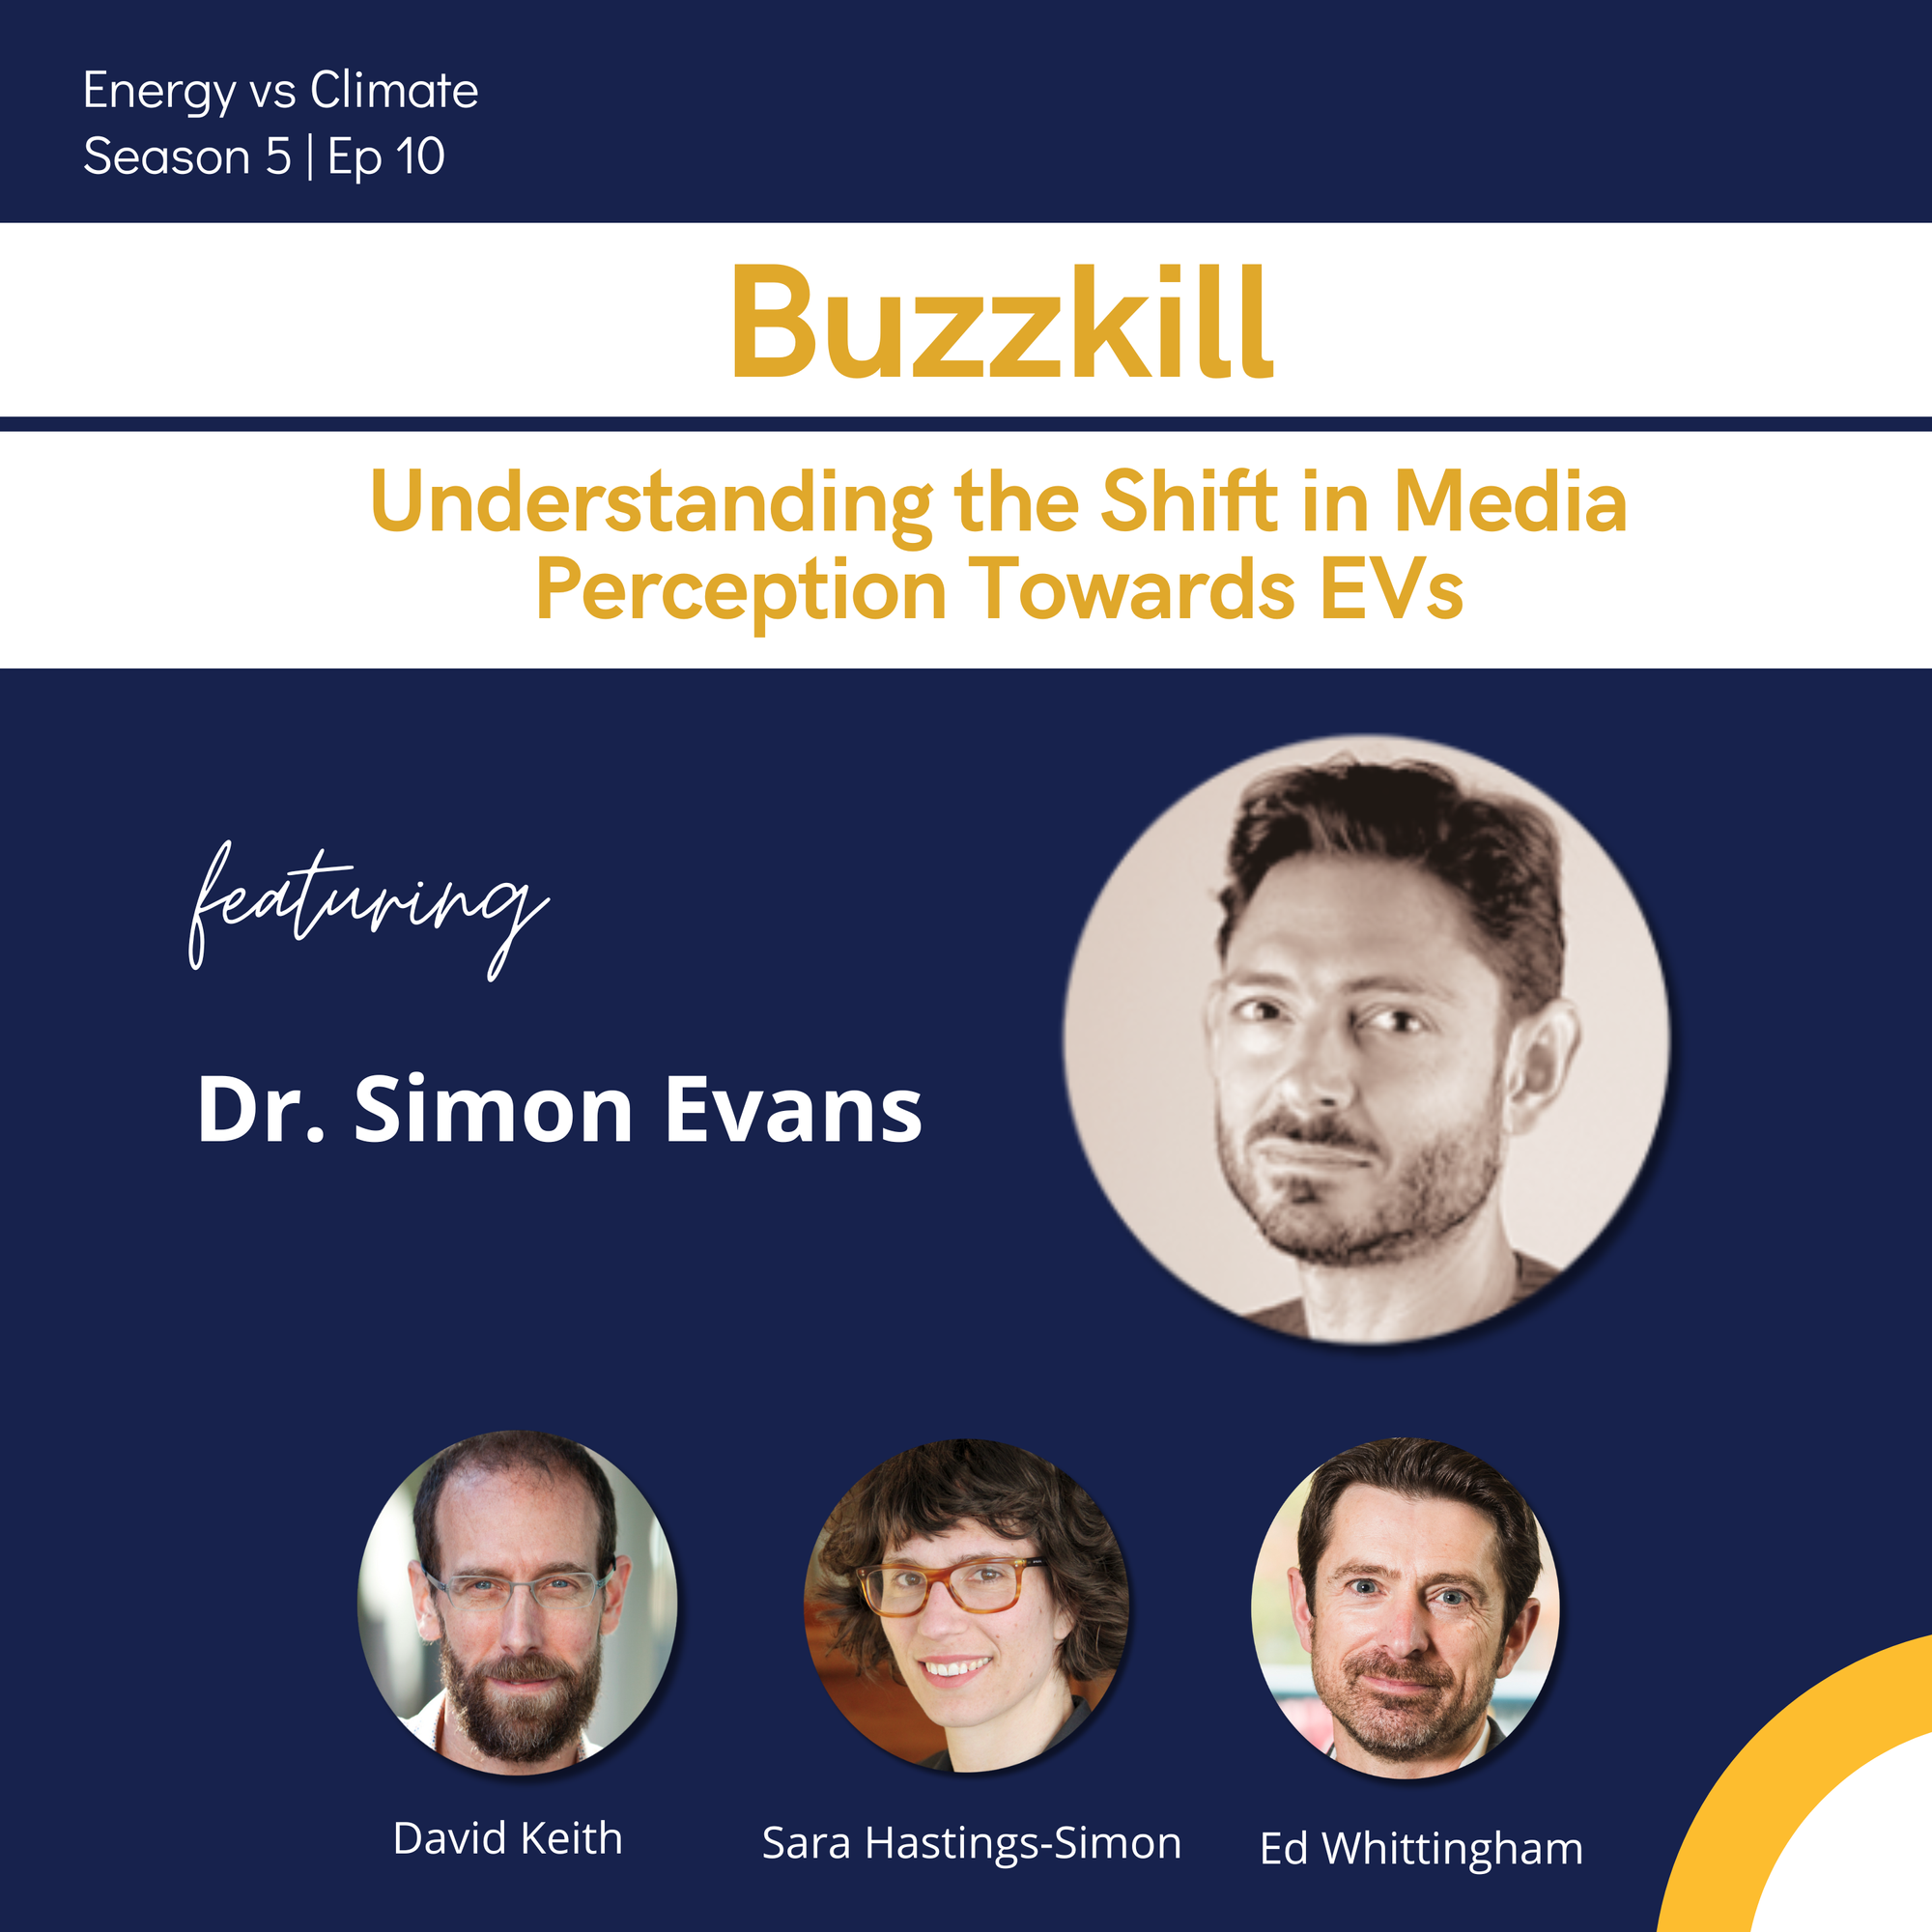 EvC Podcast Episode #56: Buzzkill - Understanding the Shift in Media Perception Towards EVs